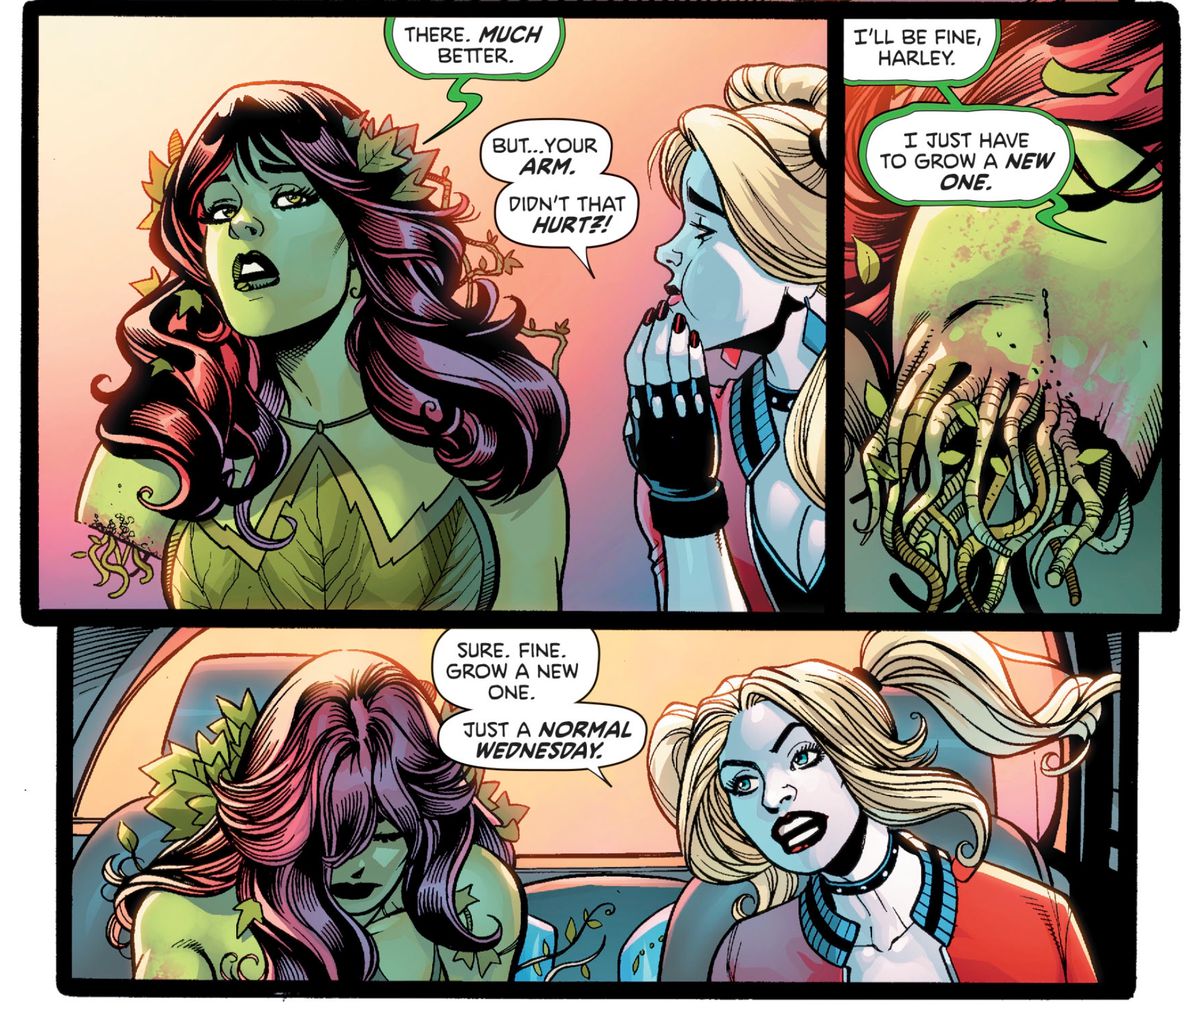 Poison Ivy will be fine after chopping off her own arm, as soon as she grows a new one, she says. “Sure. Fine. Grow a new one.” Harley quips, “Just a normal Wednesday,” in Harley Quinn and Poison Ivy #4, DC Comics (2019). 